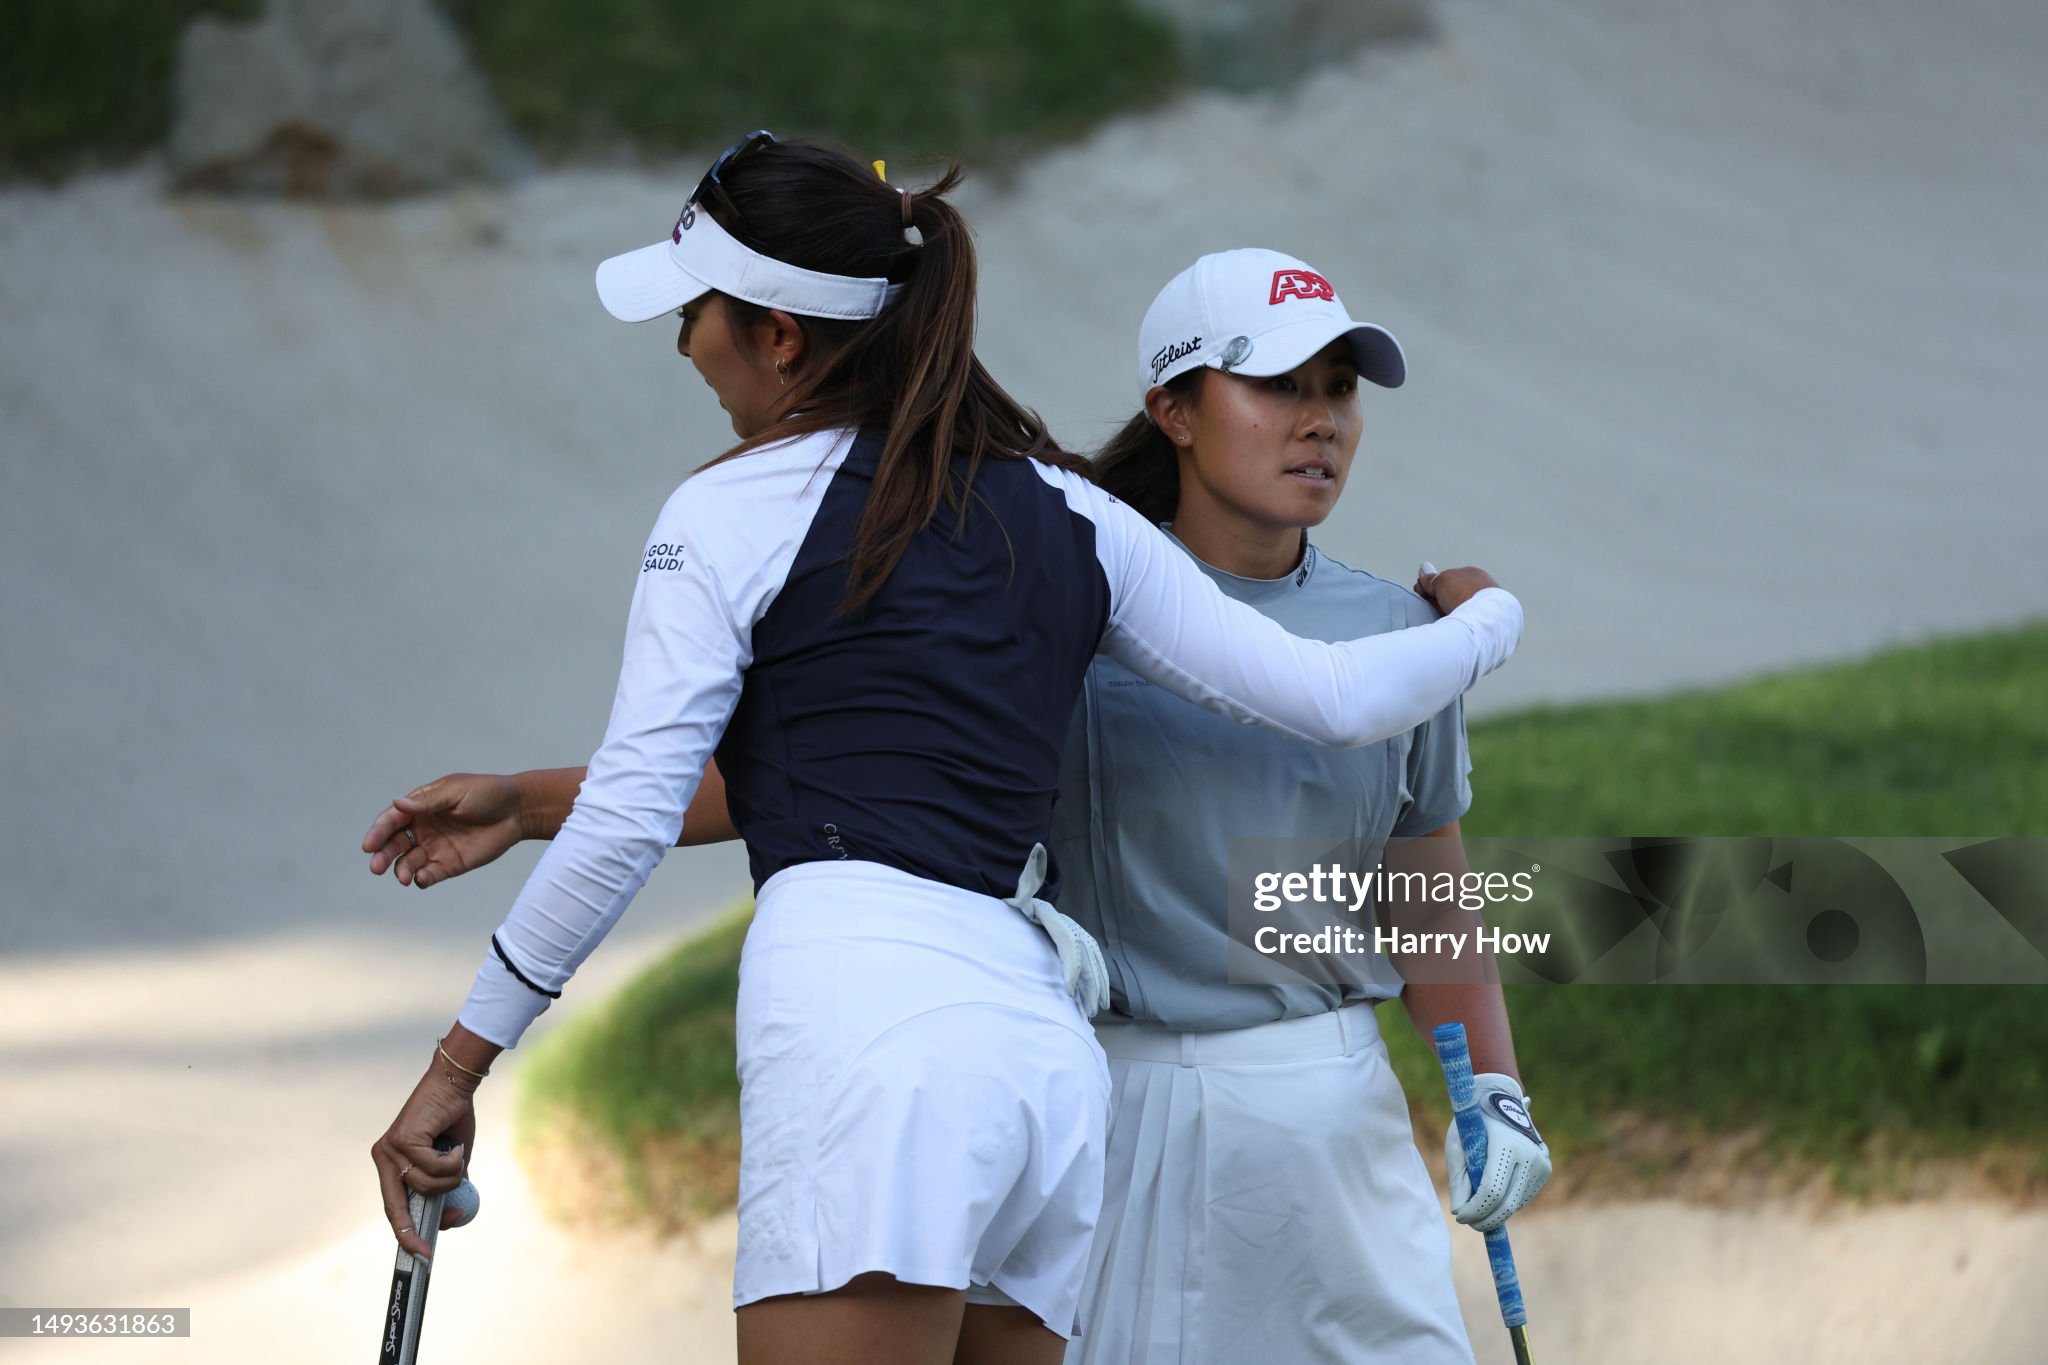 https://media.gettyimages.com/id/1493631863/photo/bank-of-hope-lpga-match-play-presented-by-mgm-rewards-day-three.jpg?s=2048x2048&w=gi&k=20&c=1SgYQO0UjwTh6RQ9F9K-8N64W8o4w5m5GWK3MDUiPy4=